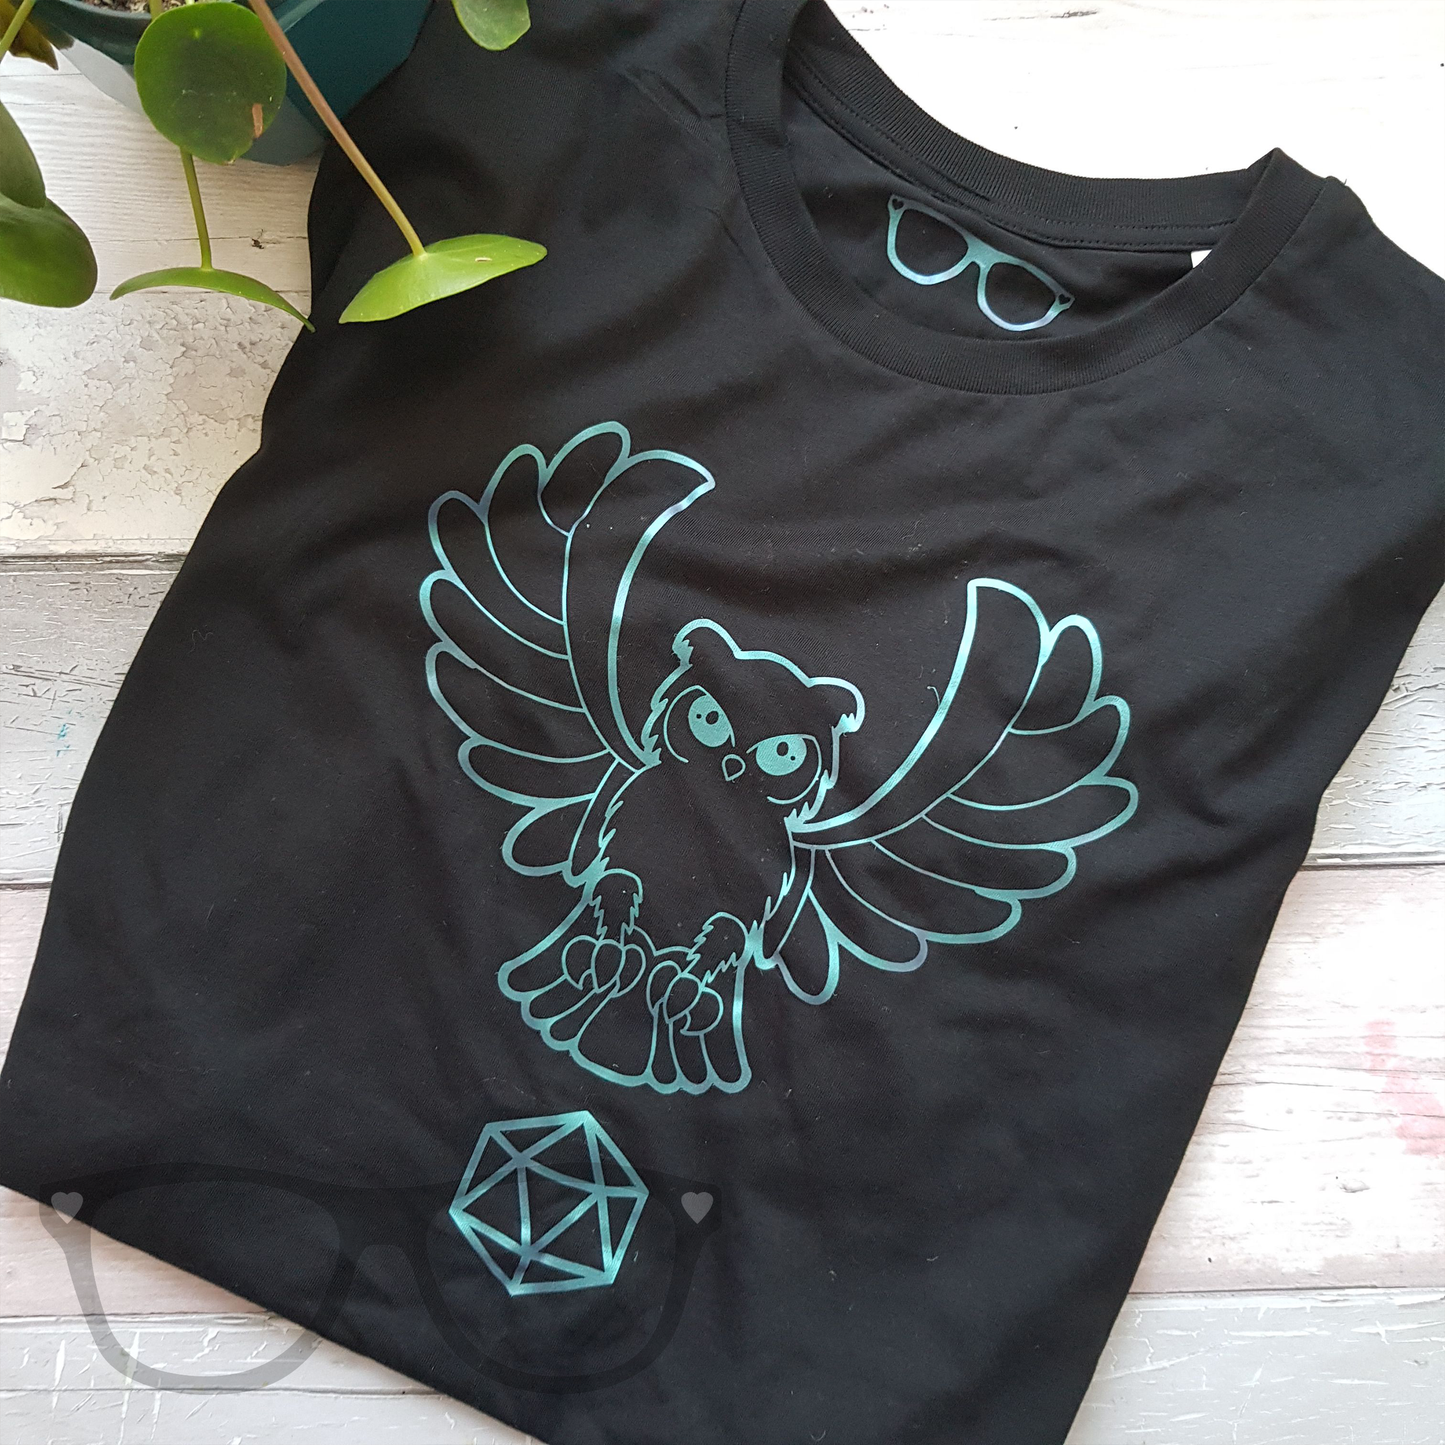 Folded black organic t-shirt with owl design on front